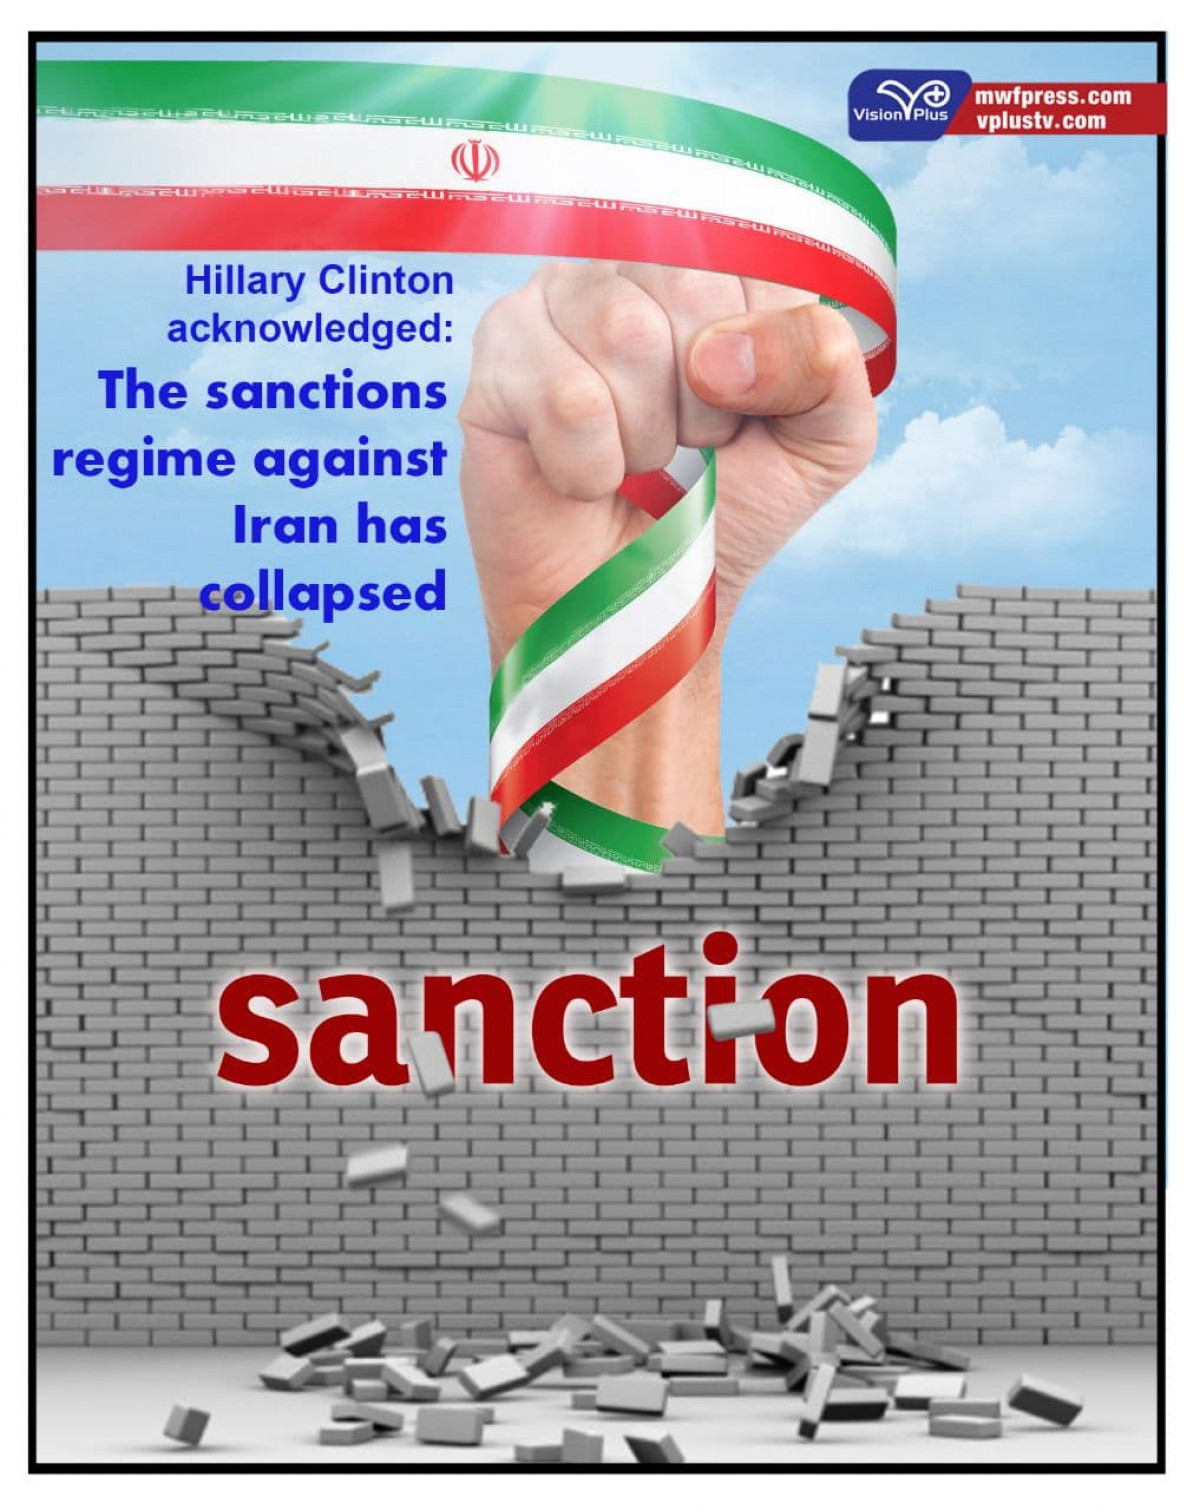 Hillary Clinton acknowledged: The sanctions regime against Iran has collapsed